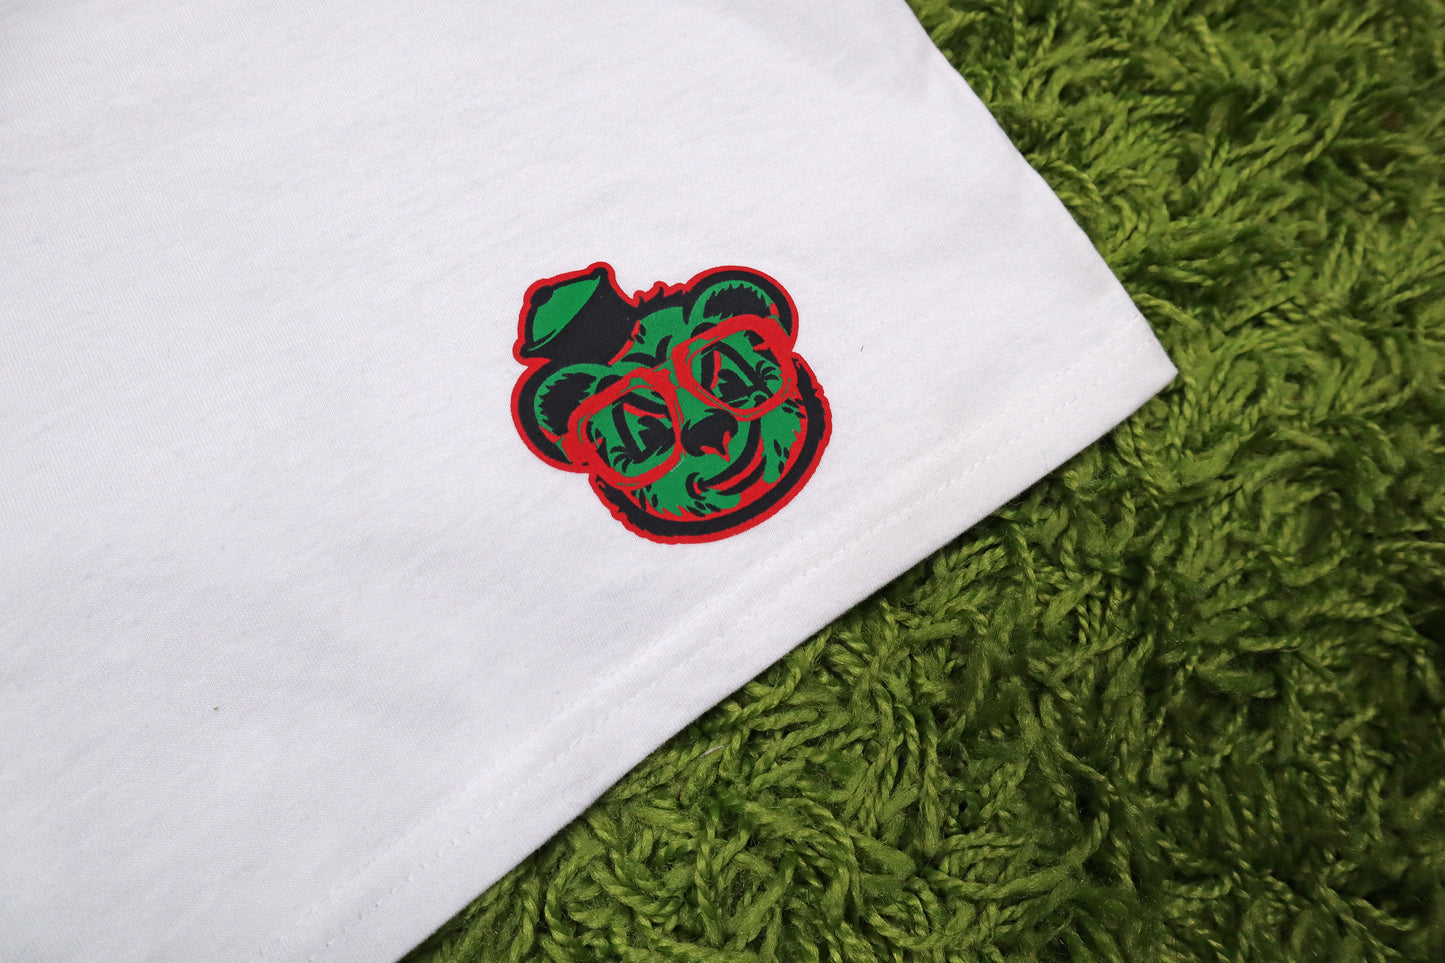 Barely "Stamped" Logo Tee (Wht/Red/Blk/Grn) - Barely Ordinary